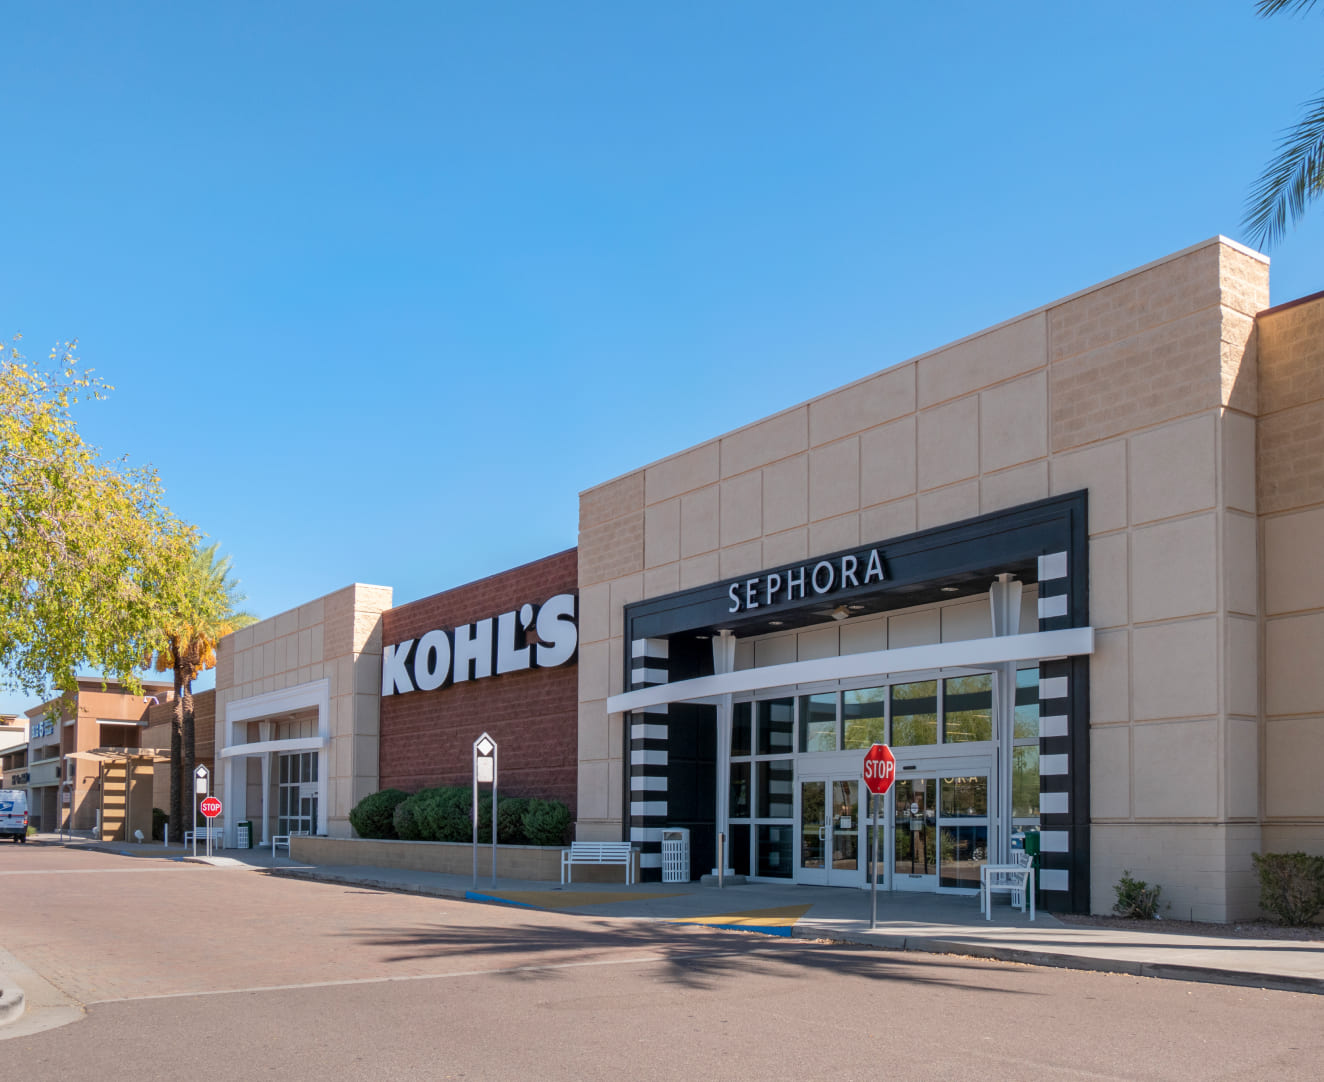 The entrance of Kohl's and Sephora located at 1161 N. Dysart Road in Avondale, AZ.